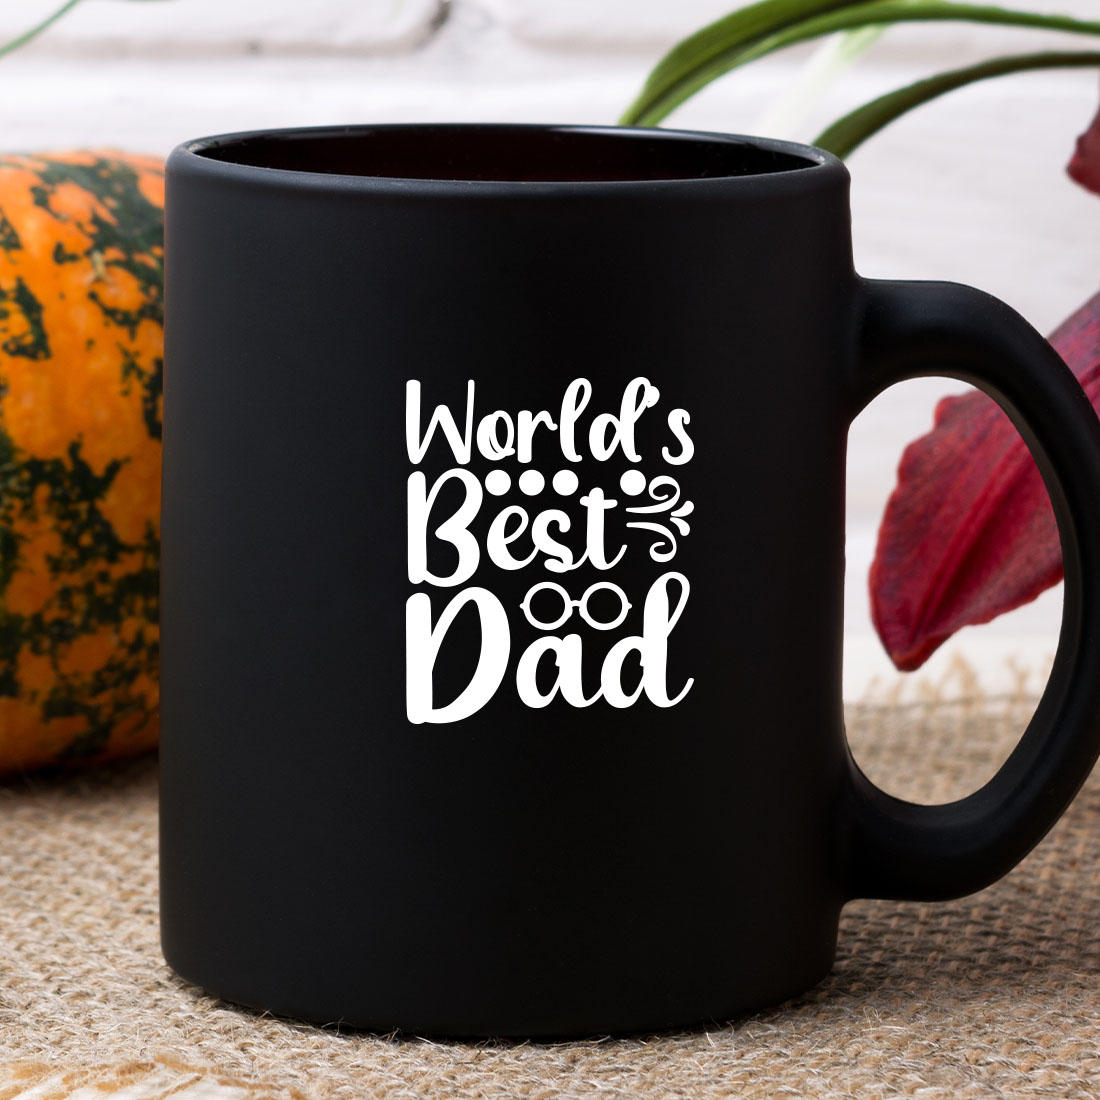 Black coffee mug with the words world's best dad on it.